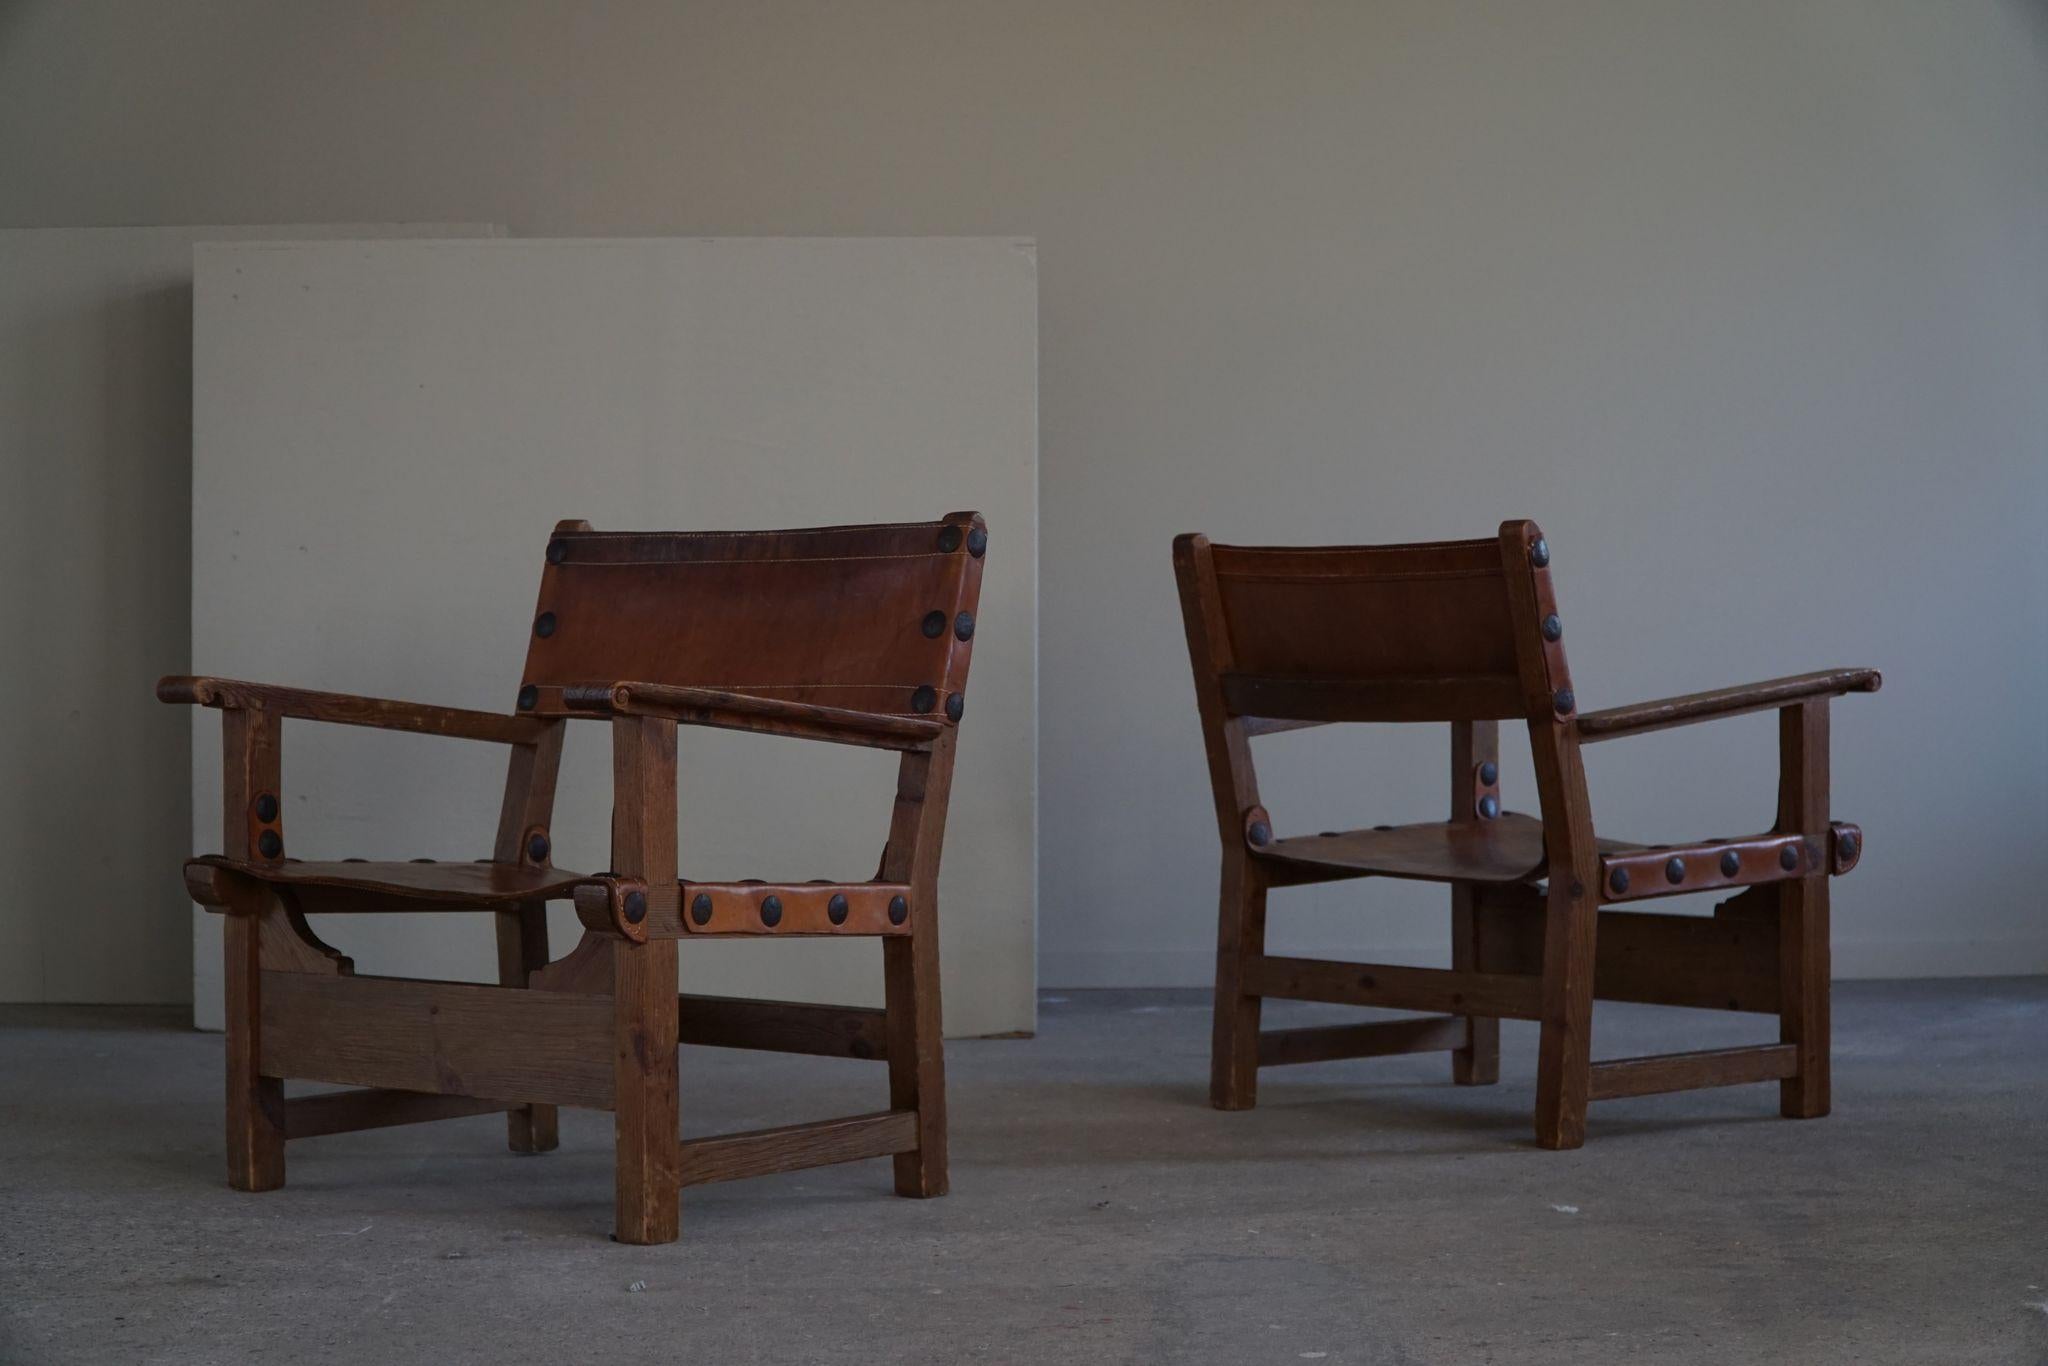 20th Century Pair of Spanish Brutalist Hunting Armchairs in Oak & Cognac Leather, Made 1960s